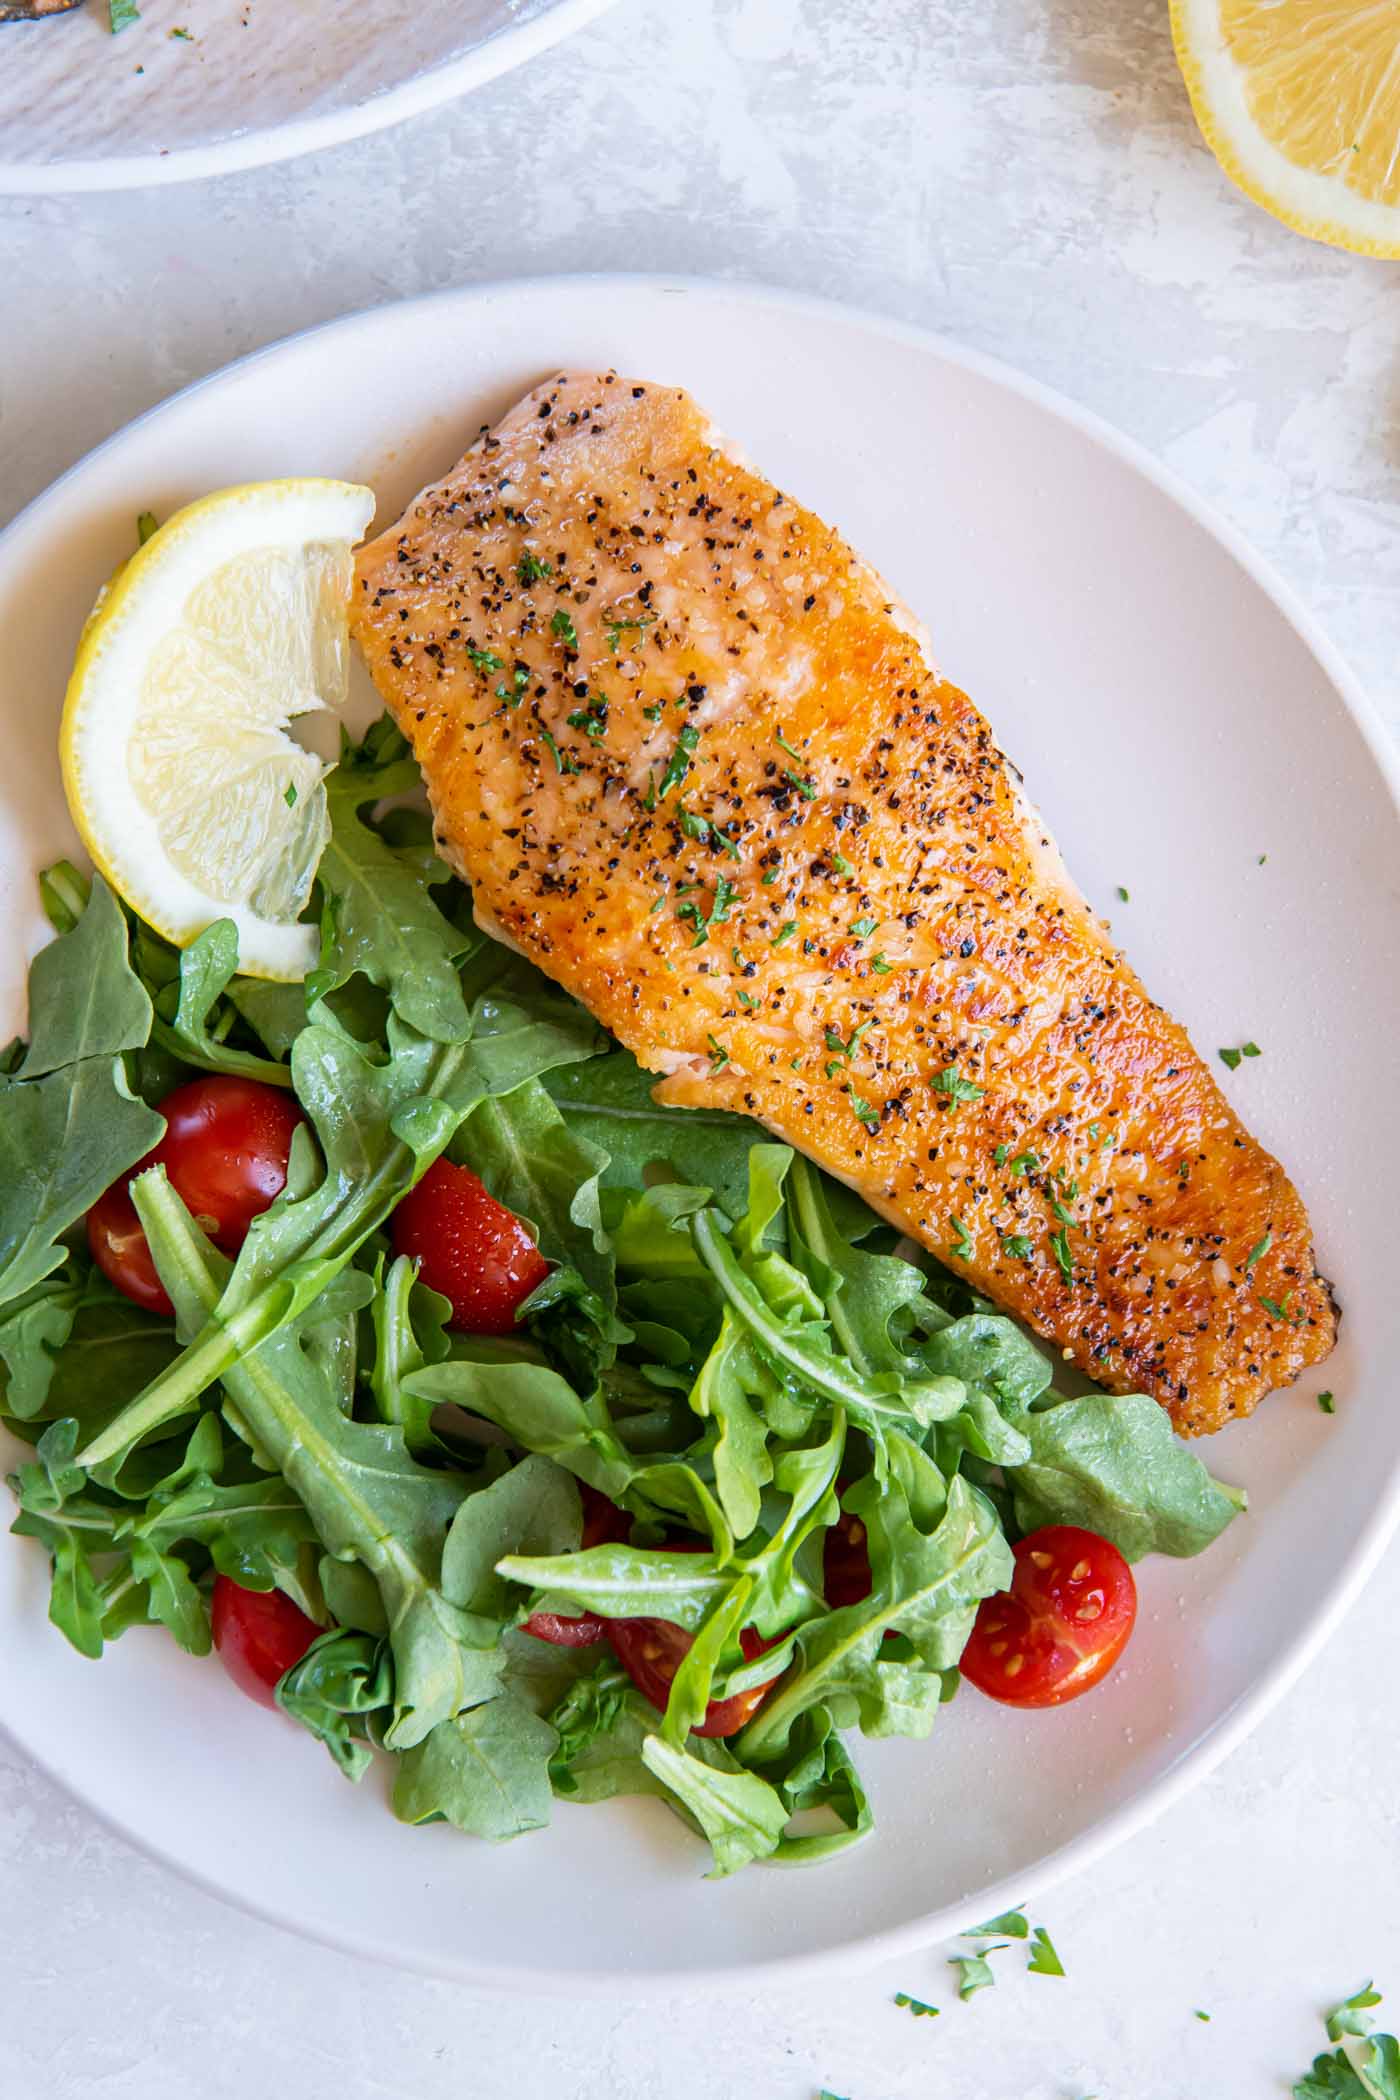 Salmon fillet served with arugula and tomato salad and a lemon wedge.